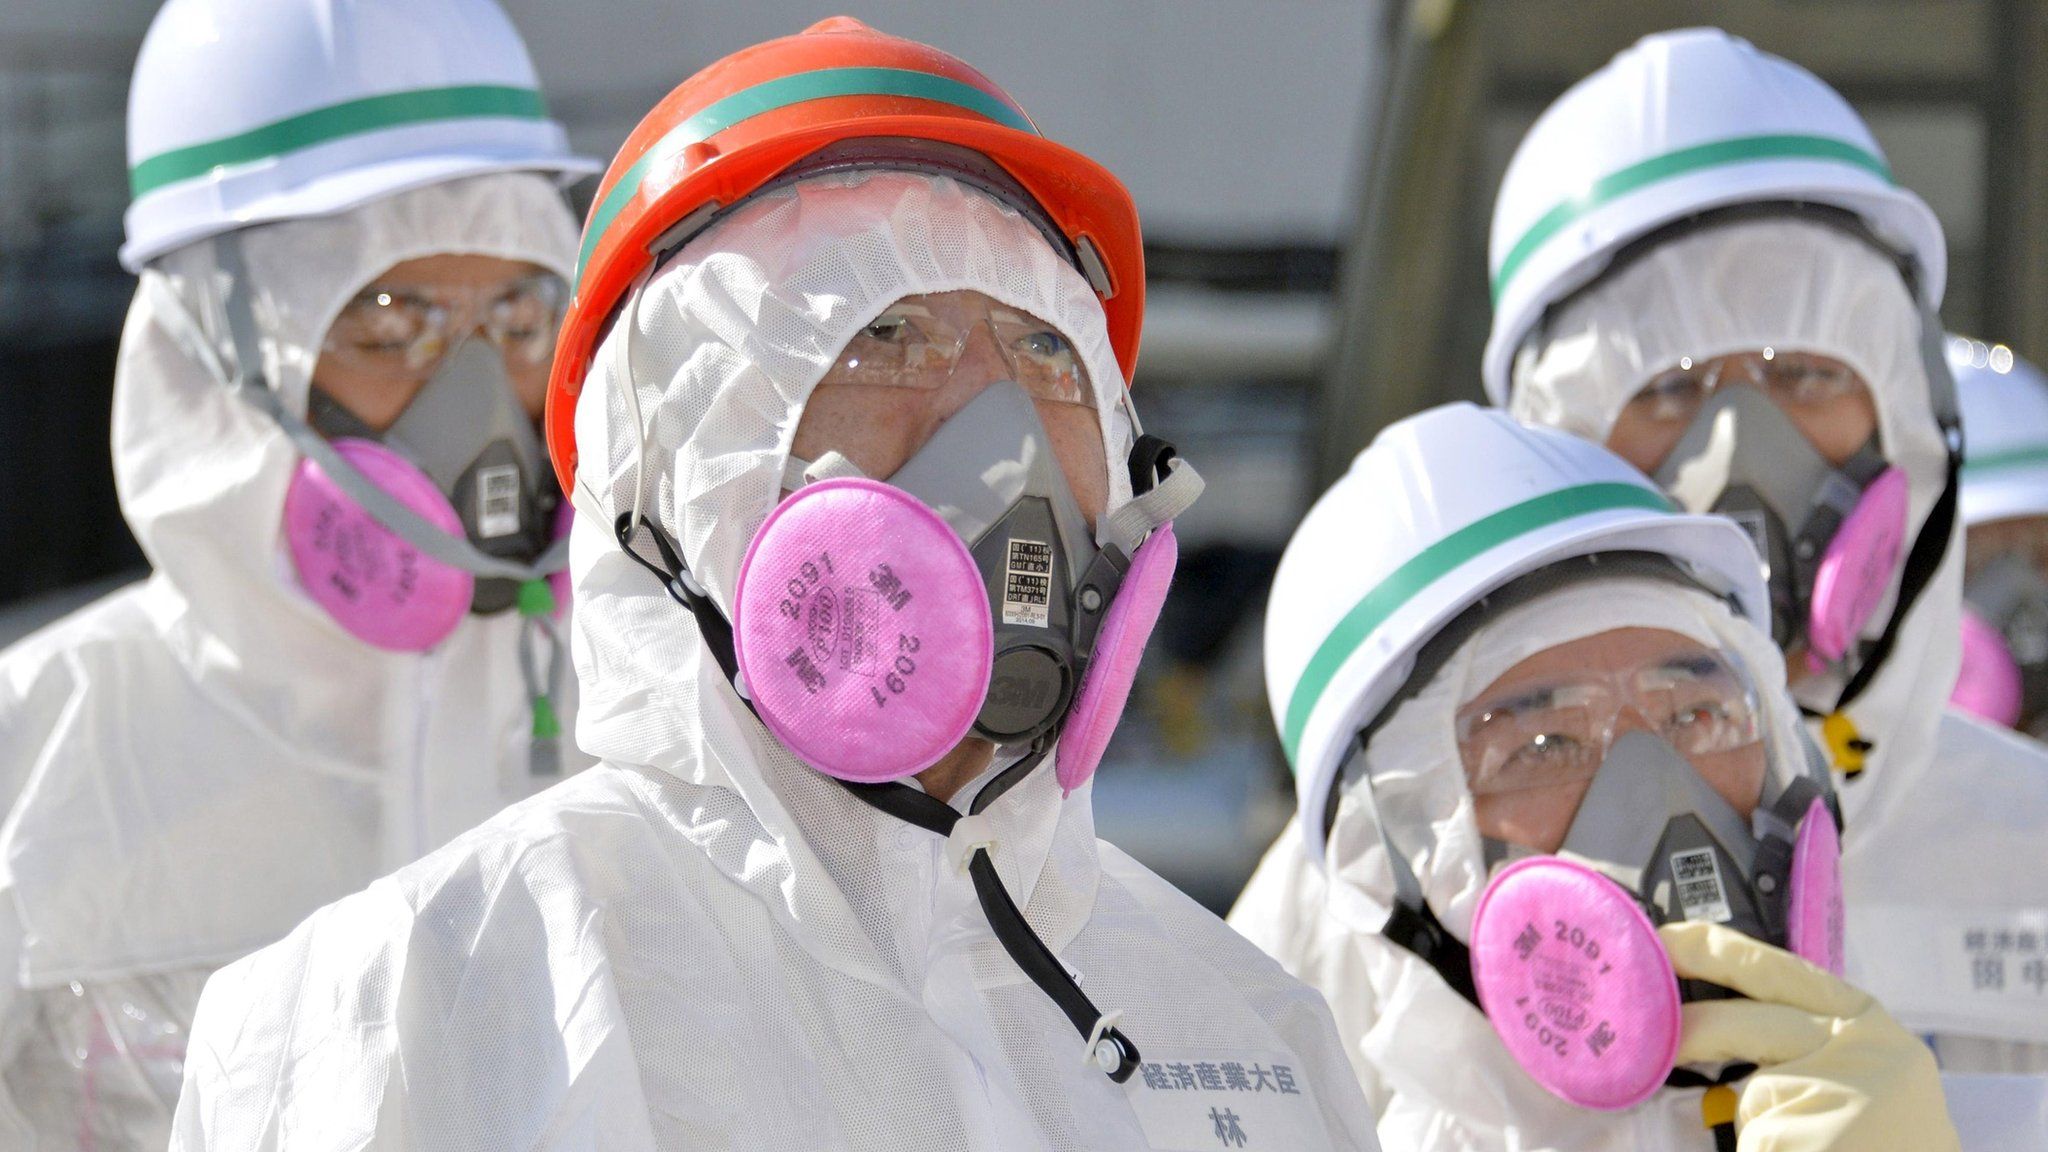 Japan's new Economy, Trade and Industry Minister Motoo Hayashi (2nd left) wearing a protective suit and a mask at the Fukushima plant